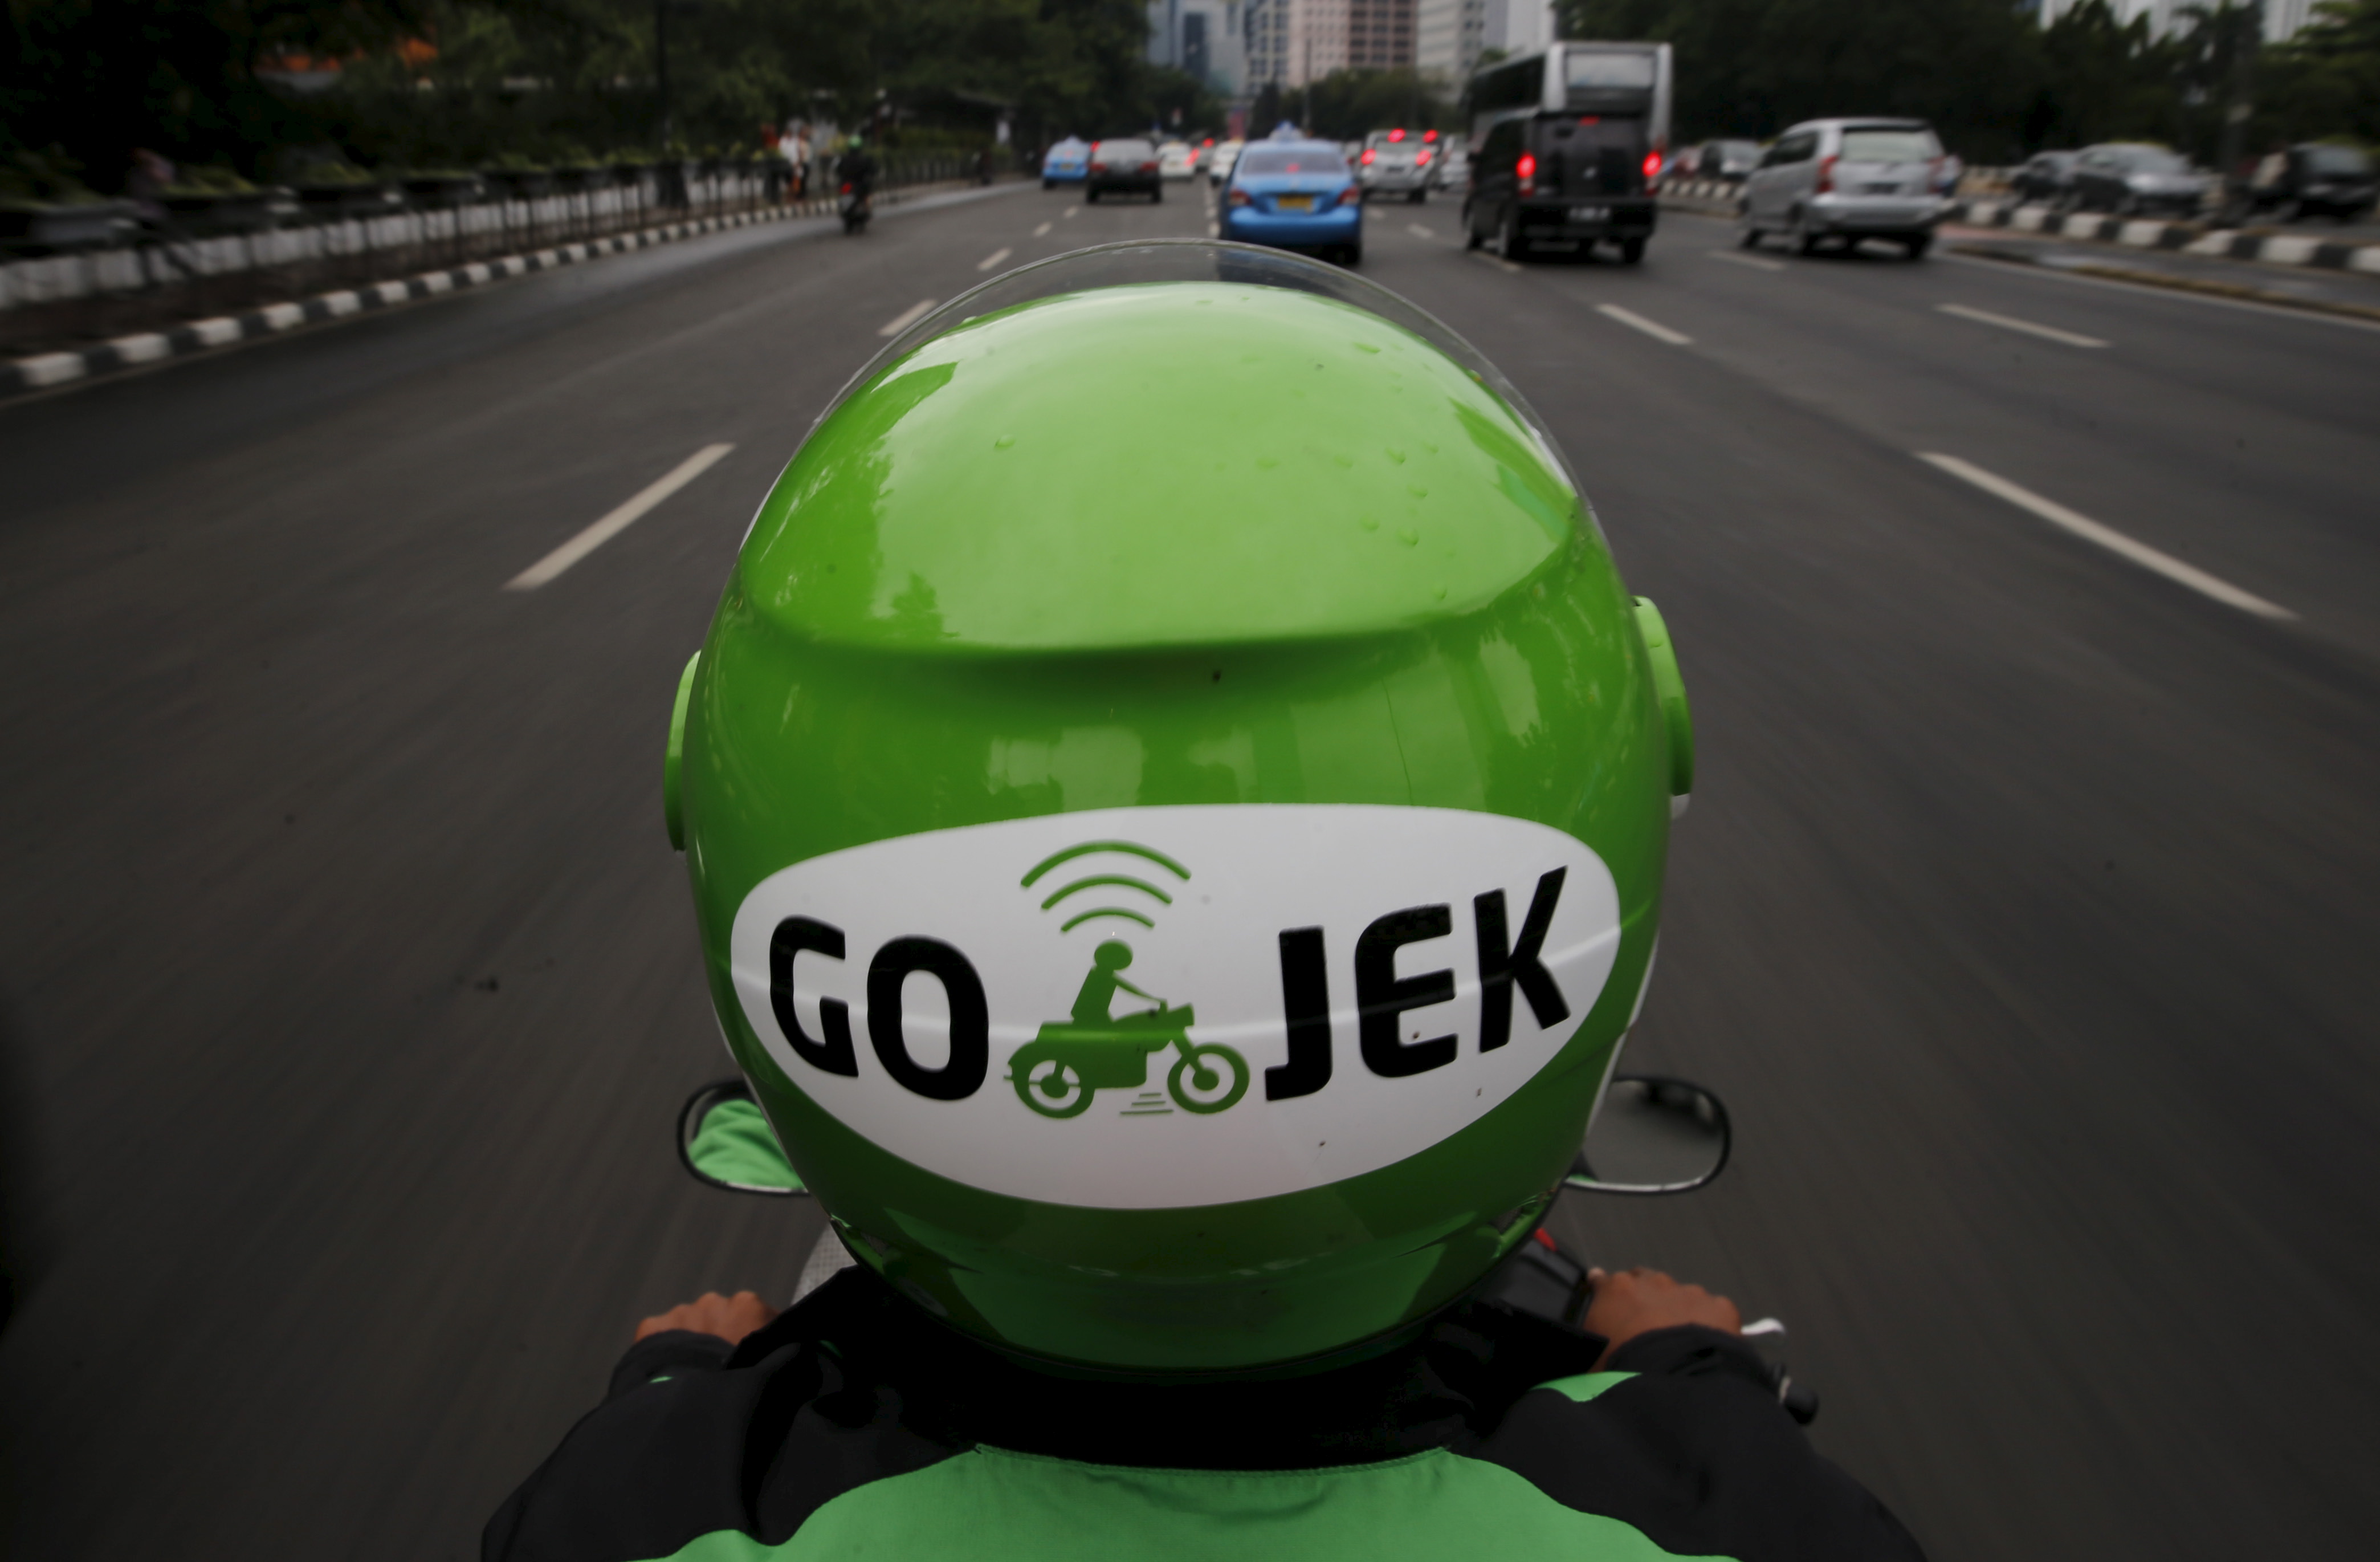 A Gojek driver rides his motorcycle through a business district street in Jakarta, June 9, 2015. REUTERS/Beawiharta  